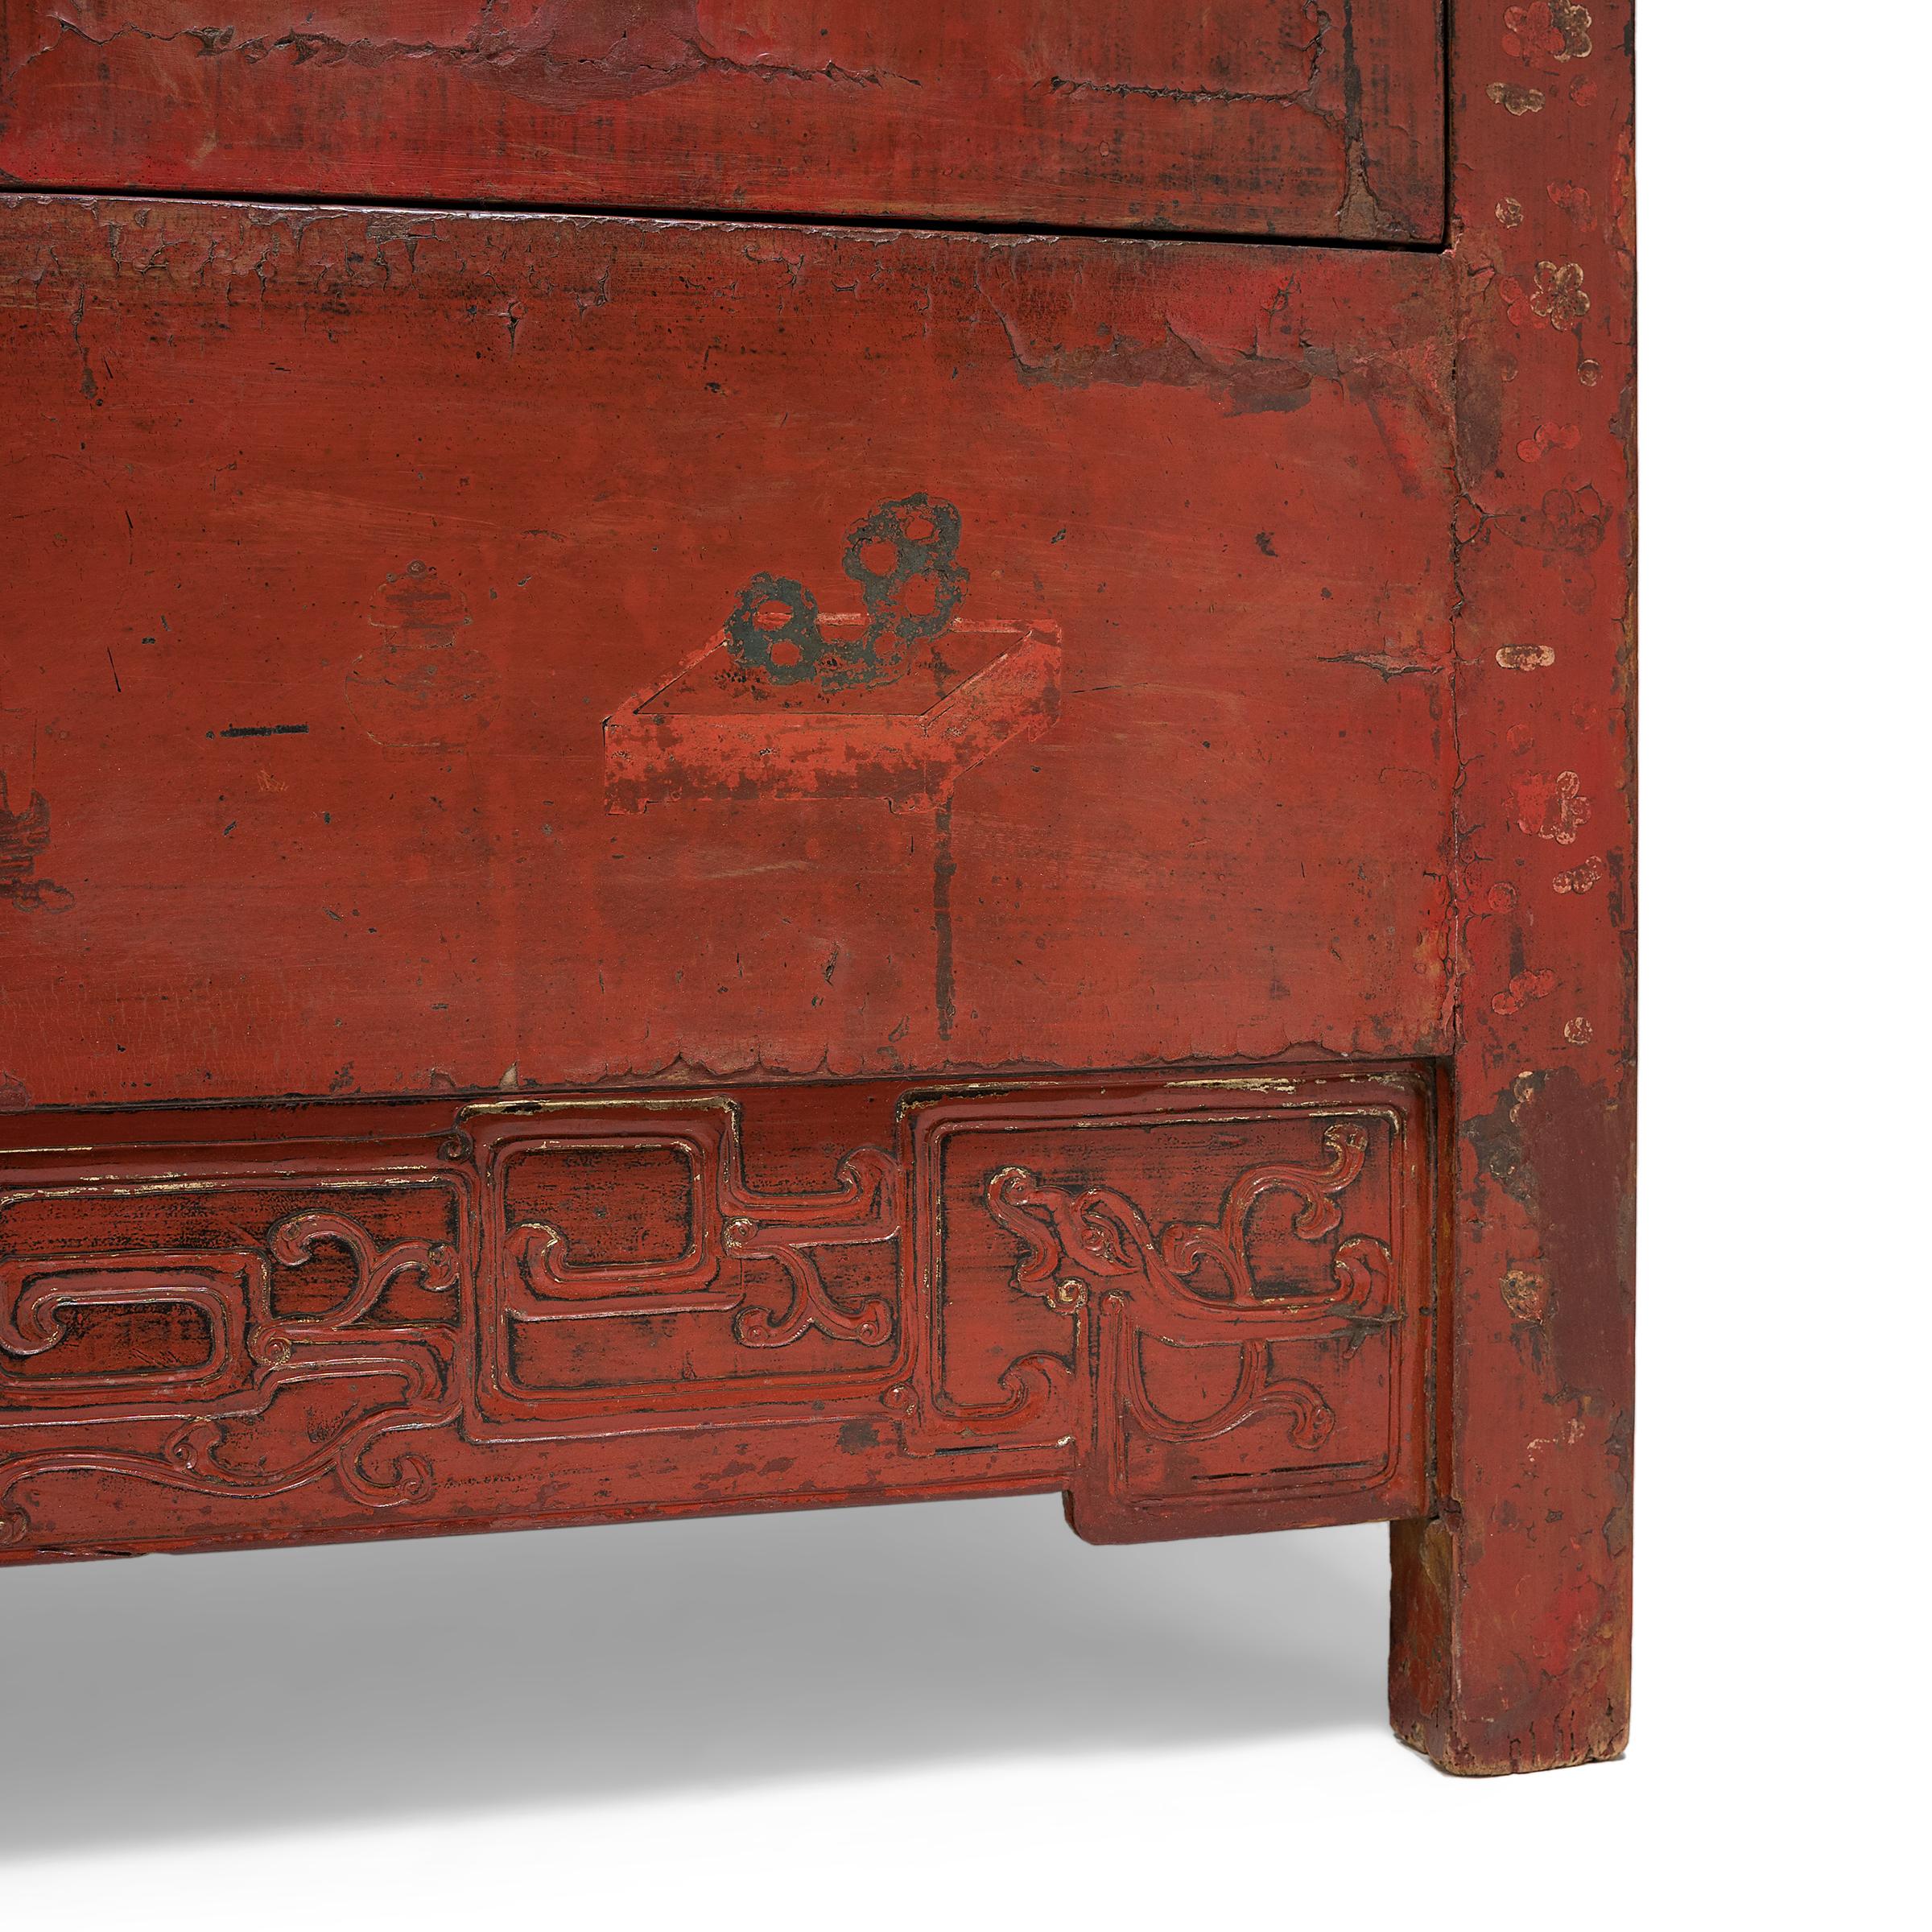 Painted Chinese Red Lacquer Cabinet, c. 1850 For Sale 2